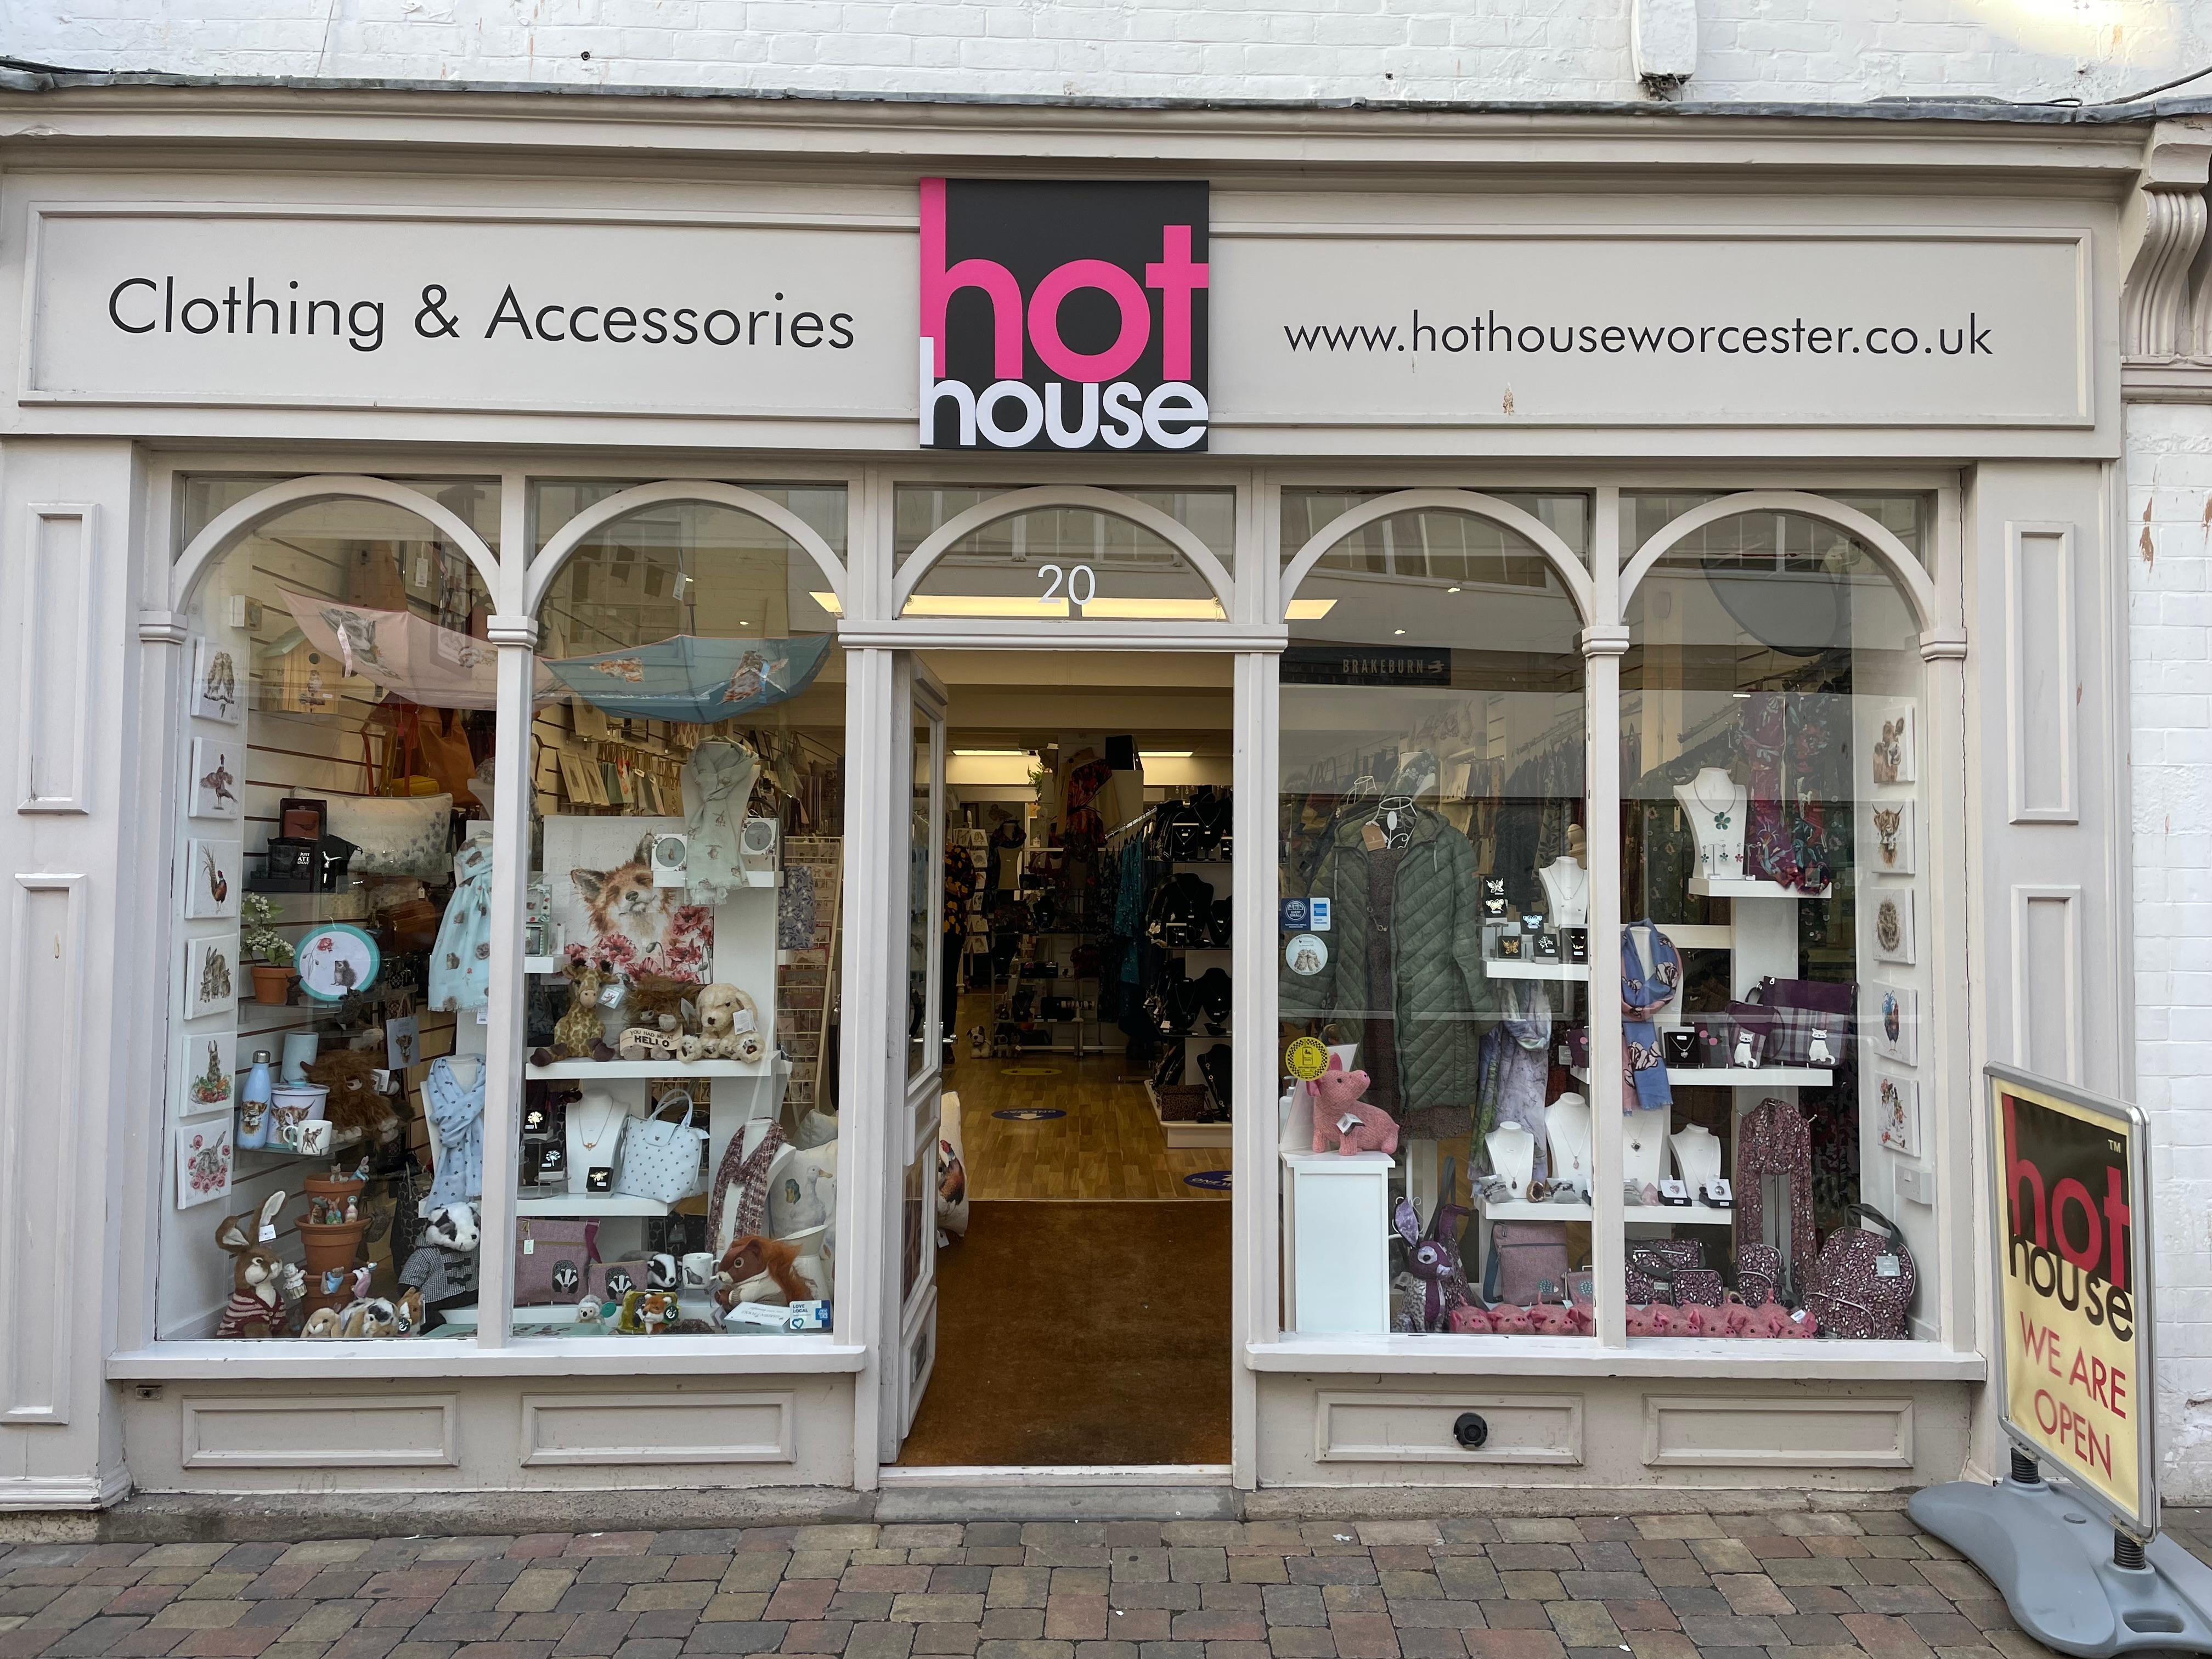 Images Hothouse Worcester